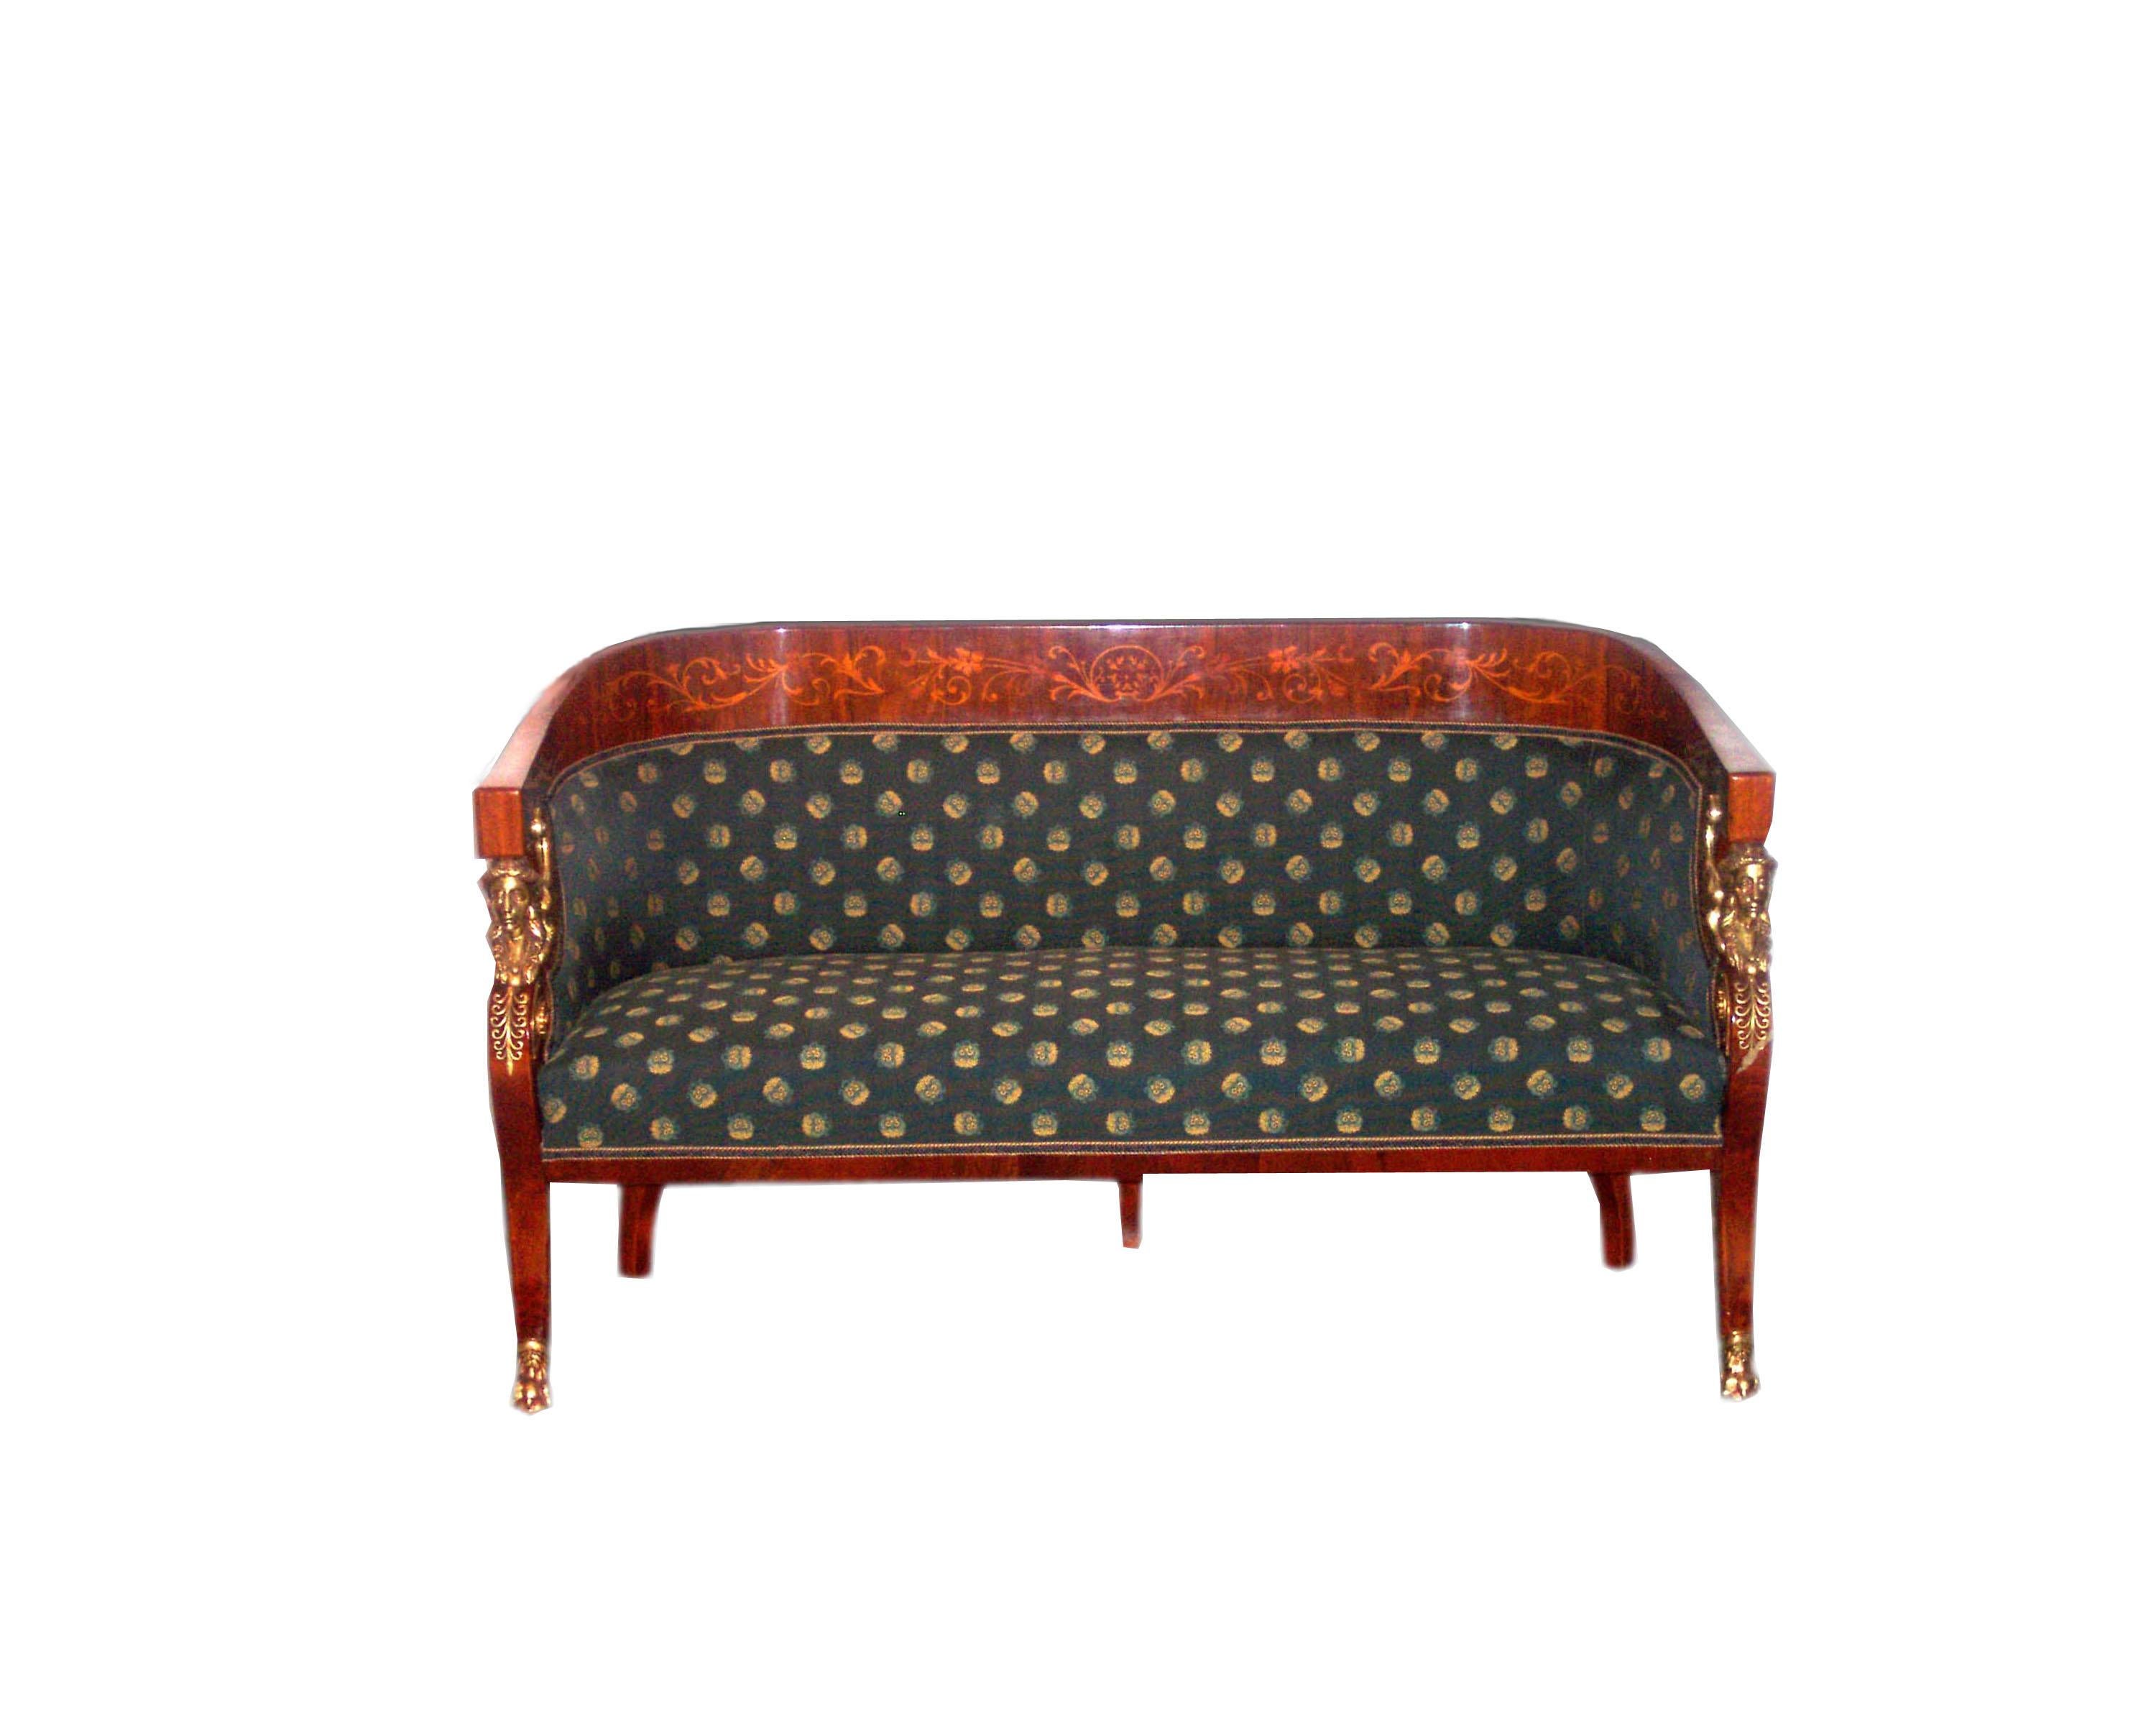 Empire revival loveseat – the suite was designed for the Hungarian Loire Tura Castle (designed by Miklos YBL) of the Baron Schlossberger family and first made by the workshop of J. Danhauser (1780-1915), Vienna. Later pieces of this furniture were